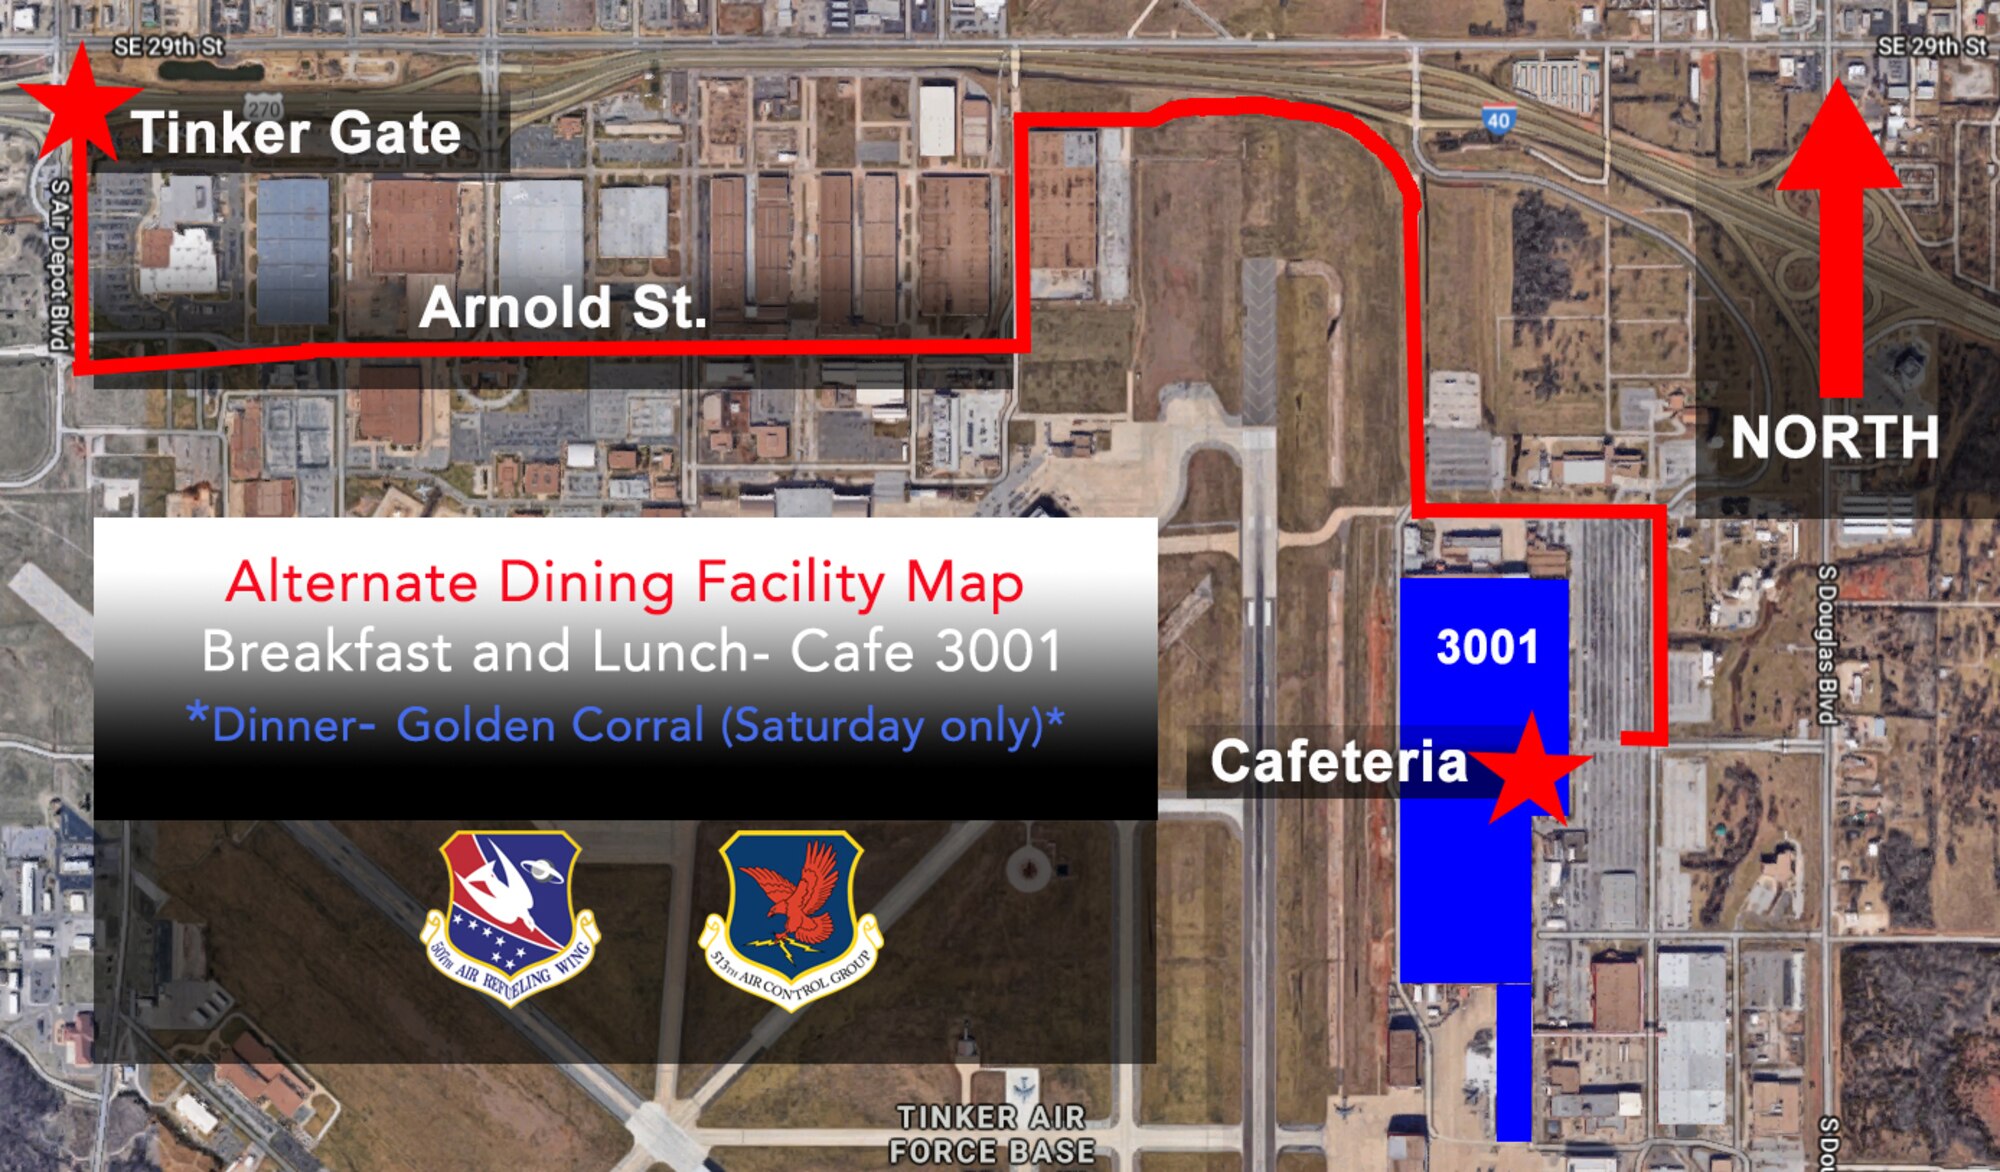 Reservists at Tinker Air Force Base, Oklahoma, will dine at Cafe 3001 for breakfast and lunch, and at Golden Corral for dinner on Saturdays until the reopening of the Vanwey Dining Facility. (U.S. Air Force image by Lauren Gleason)